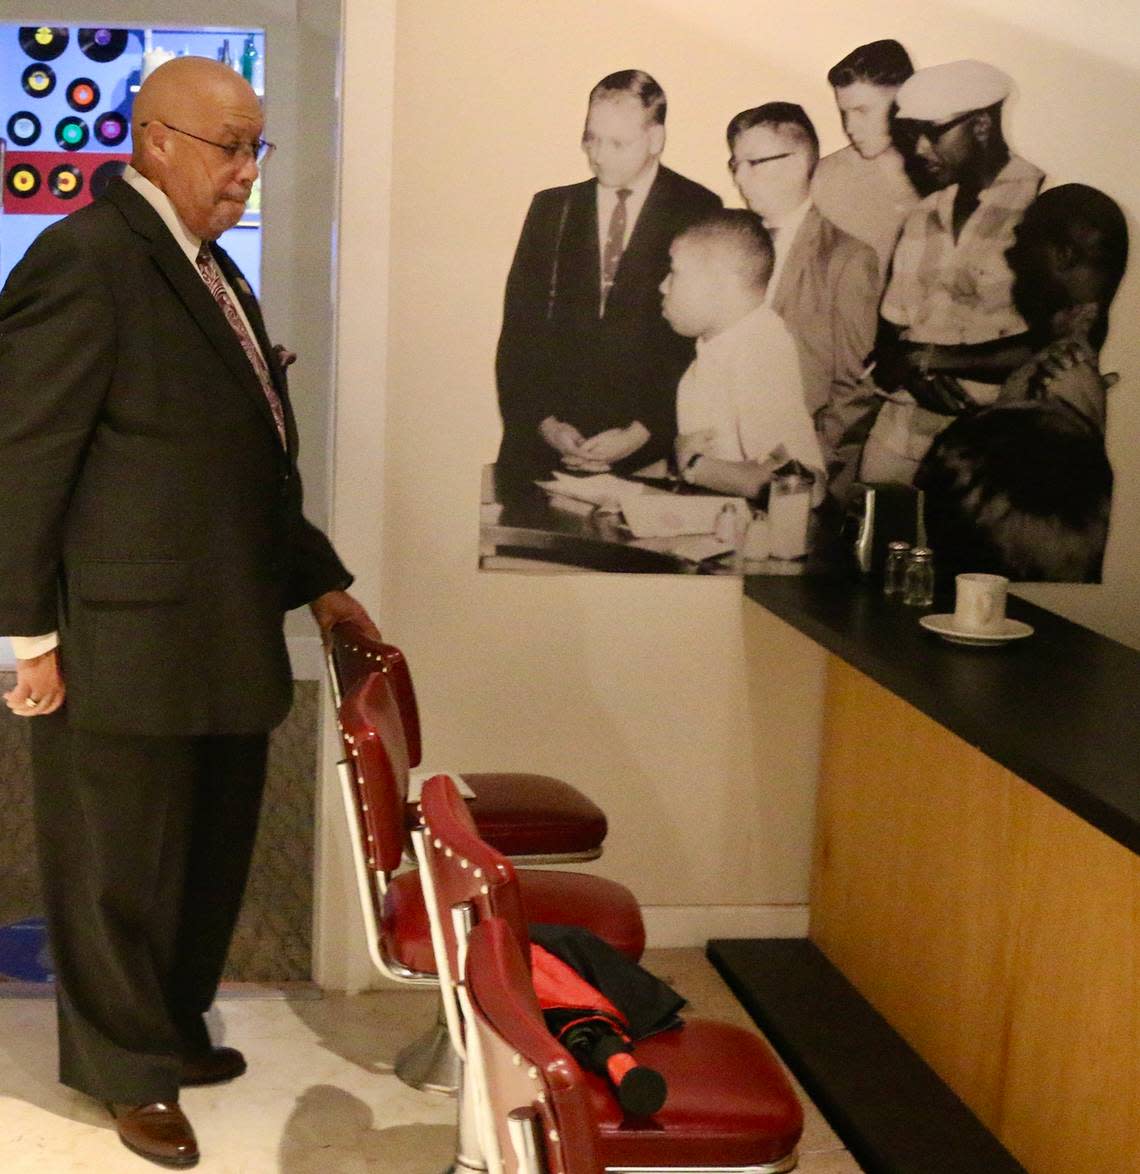 Rodney Hurst visits a replica of the lunch counter where he took part in a peaceful demonstration to protest the discrimination faced by Blacks, at a display at at the Ritz Theater, on Friday, Oct. 23, 2020, in Jacksonville, Fla. In the background is a blow up of a photo taken in 1960 when he was 16. After leaving the lunch counter in downtown Jacksonville as a teen, a mob of whites began indiscriminately clubbing African Americans with baseball bats and ax handles during a day now remembered as Ax Handle Saturday.